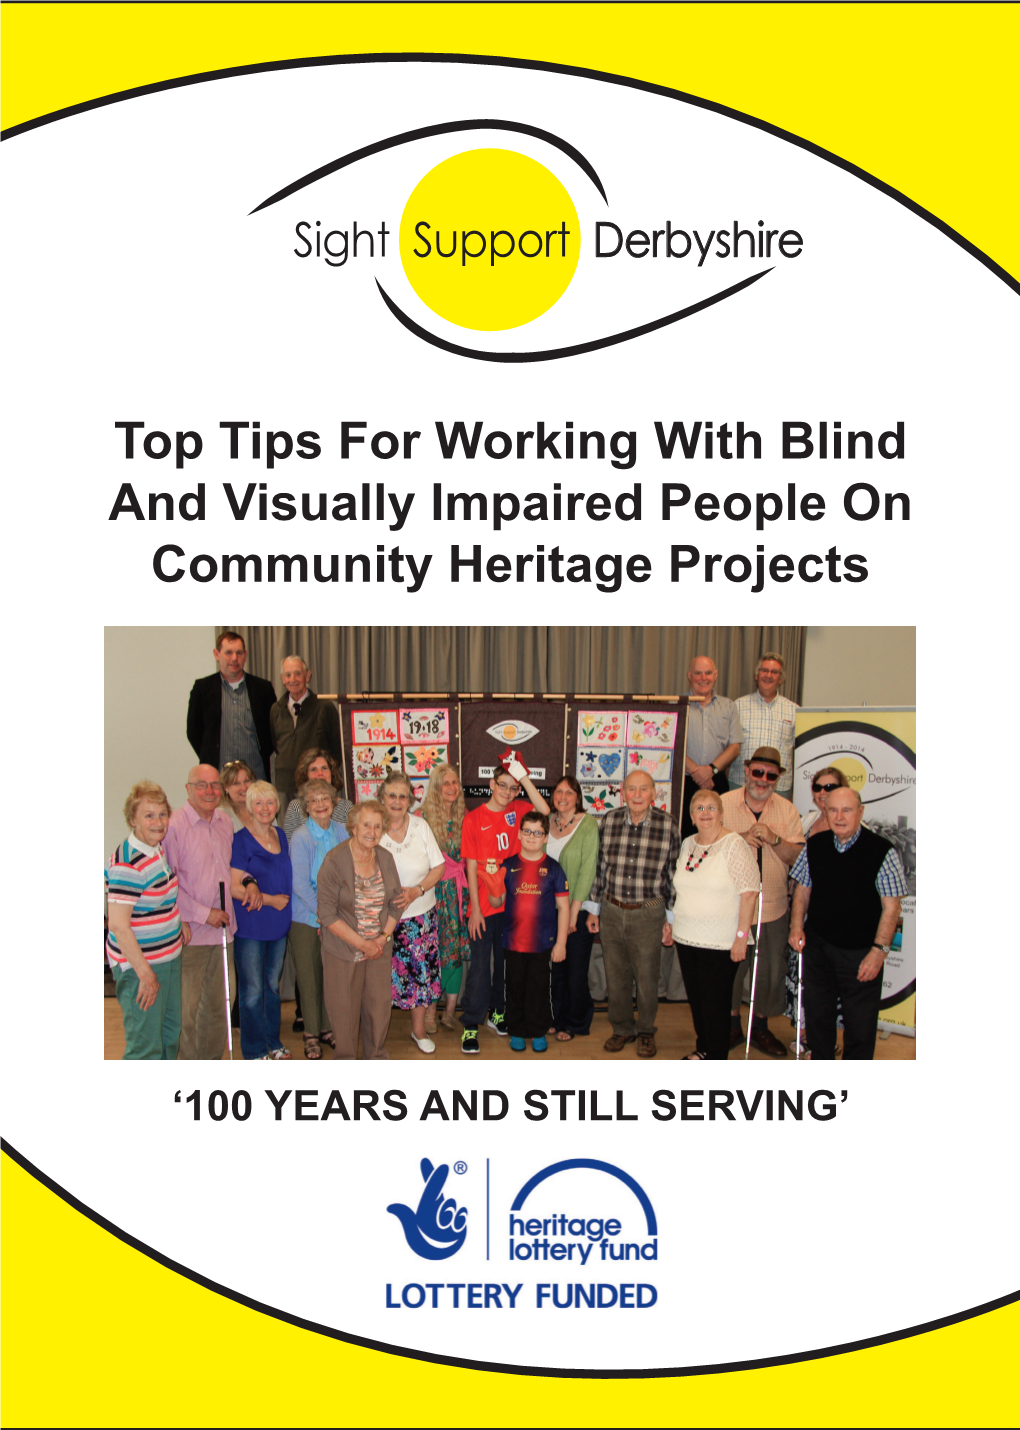 Top Tips for Working with Blind and Visually Impaired People on Community Heritage Projects